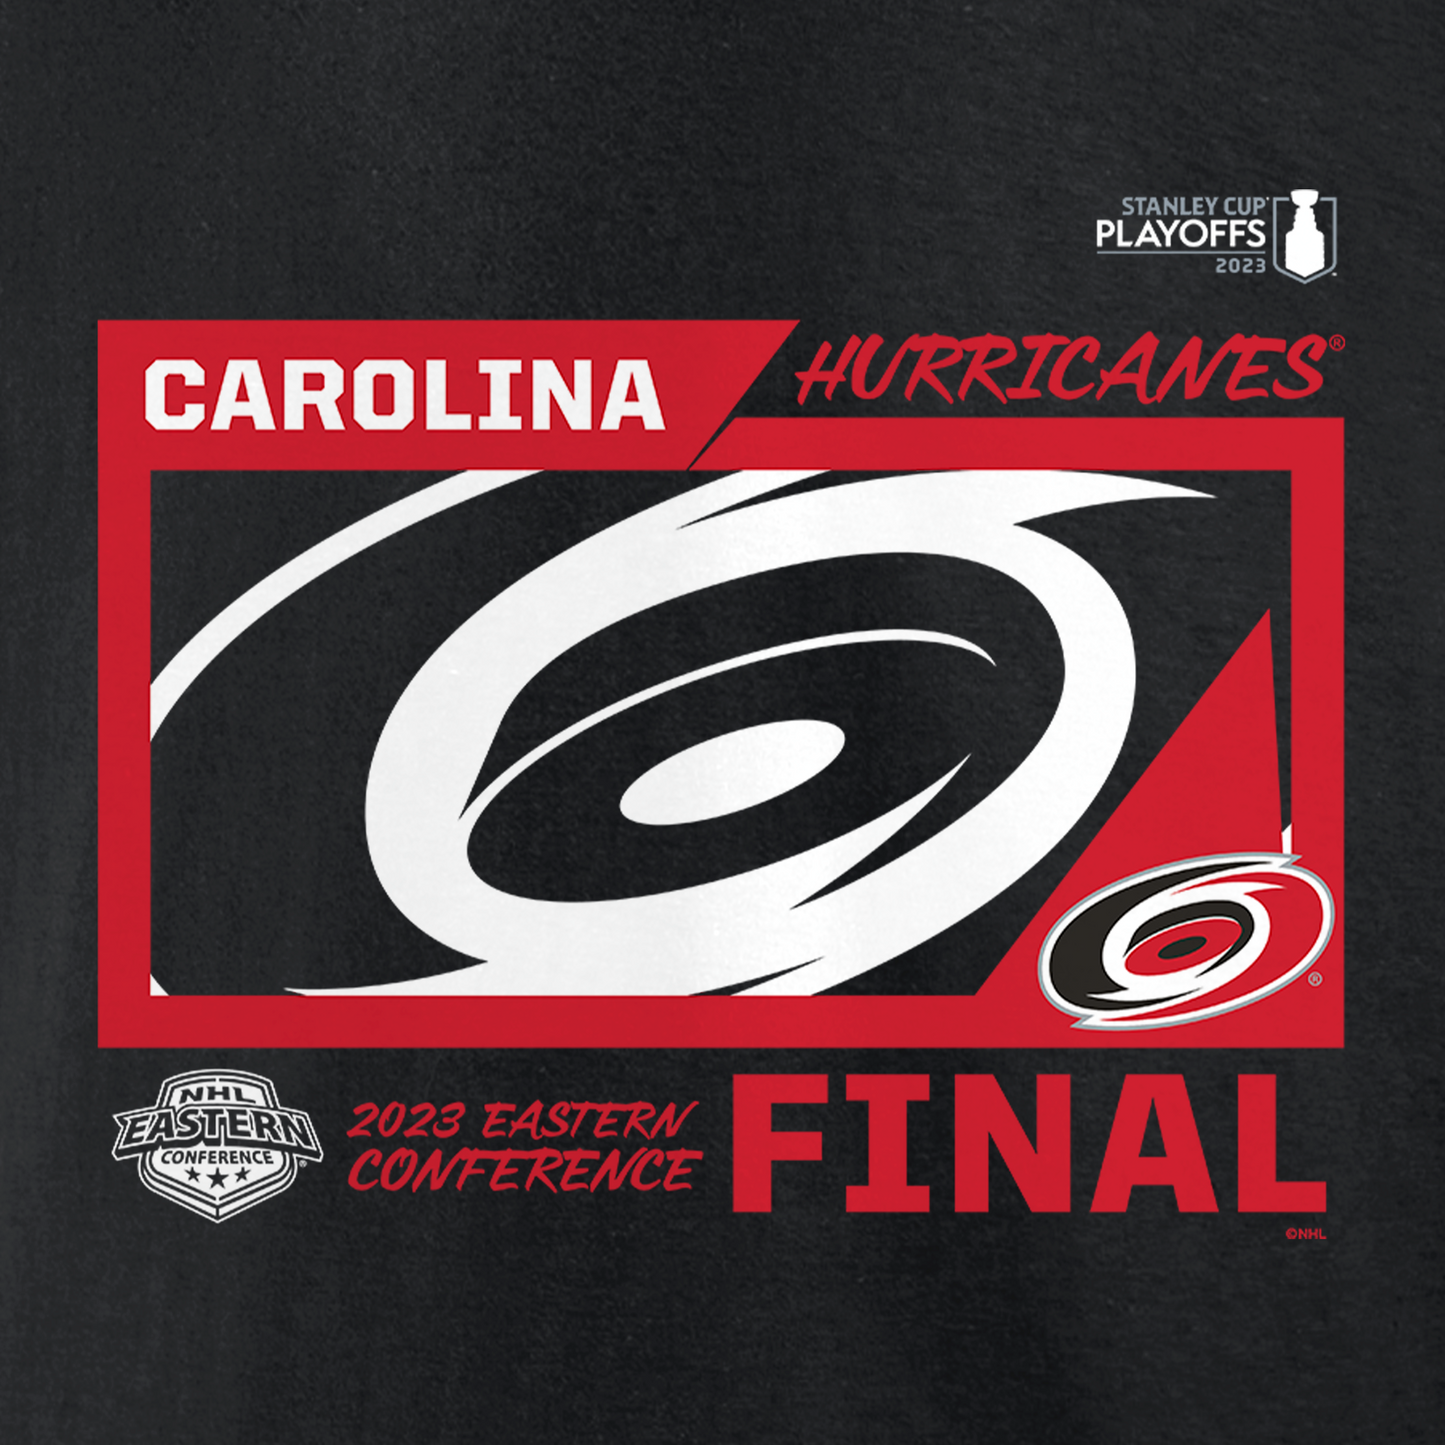 Close up of graphic featuring Hurricanes and Eastern Conference and Stanley Cup Playoffs logos